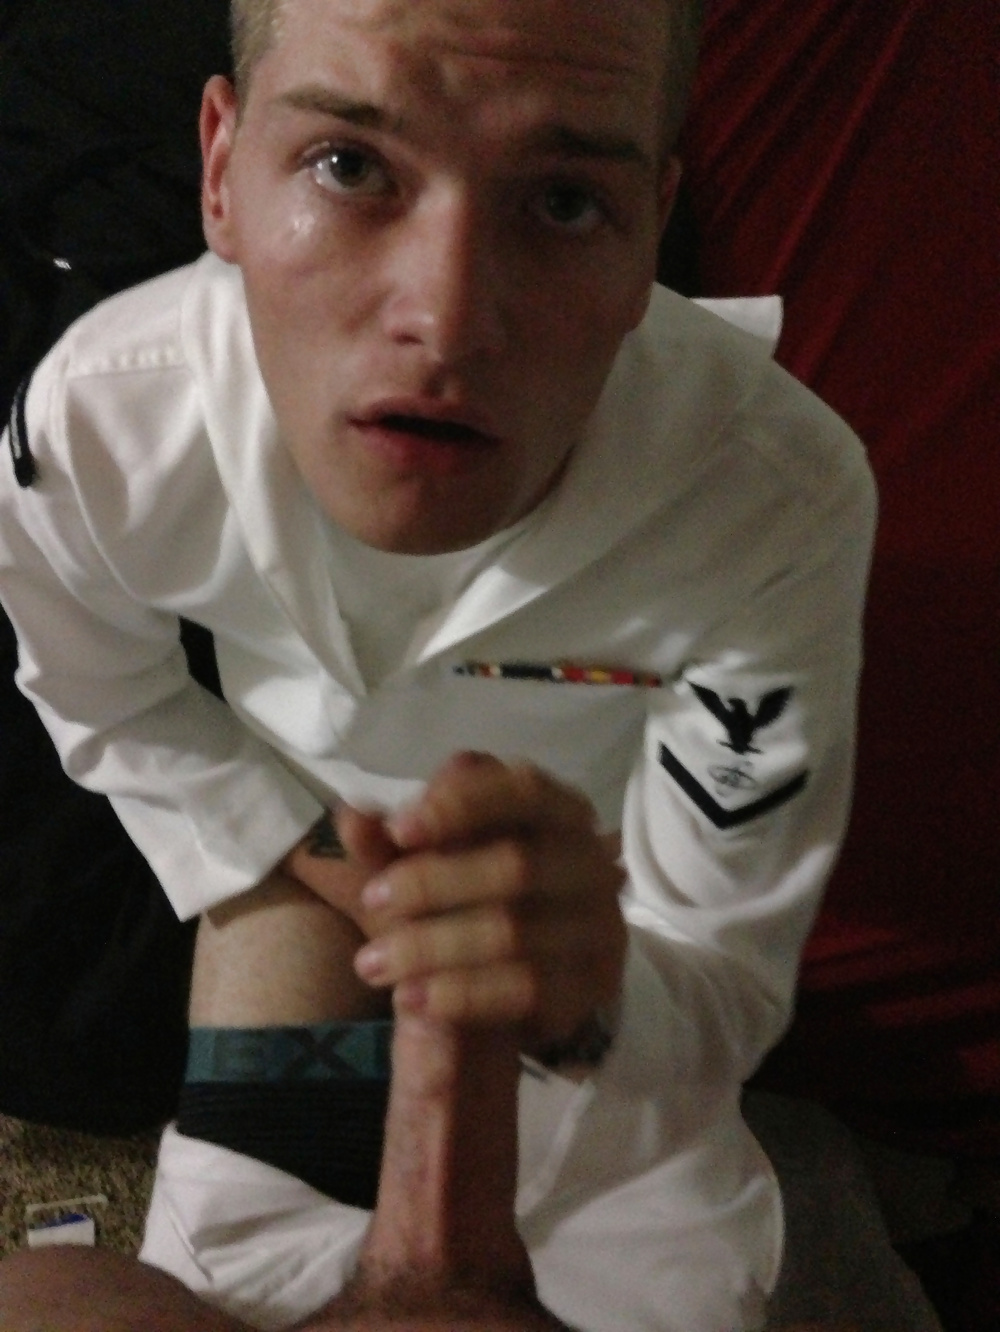 Boy1: Young Twink Sailor Cocksucker in His Whites #24718325